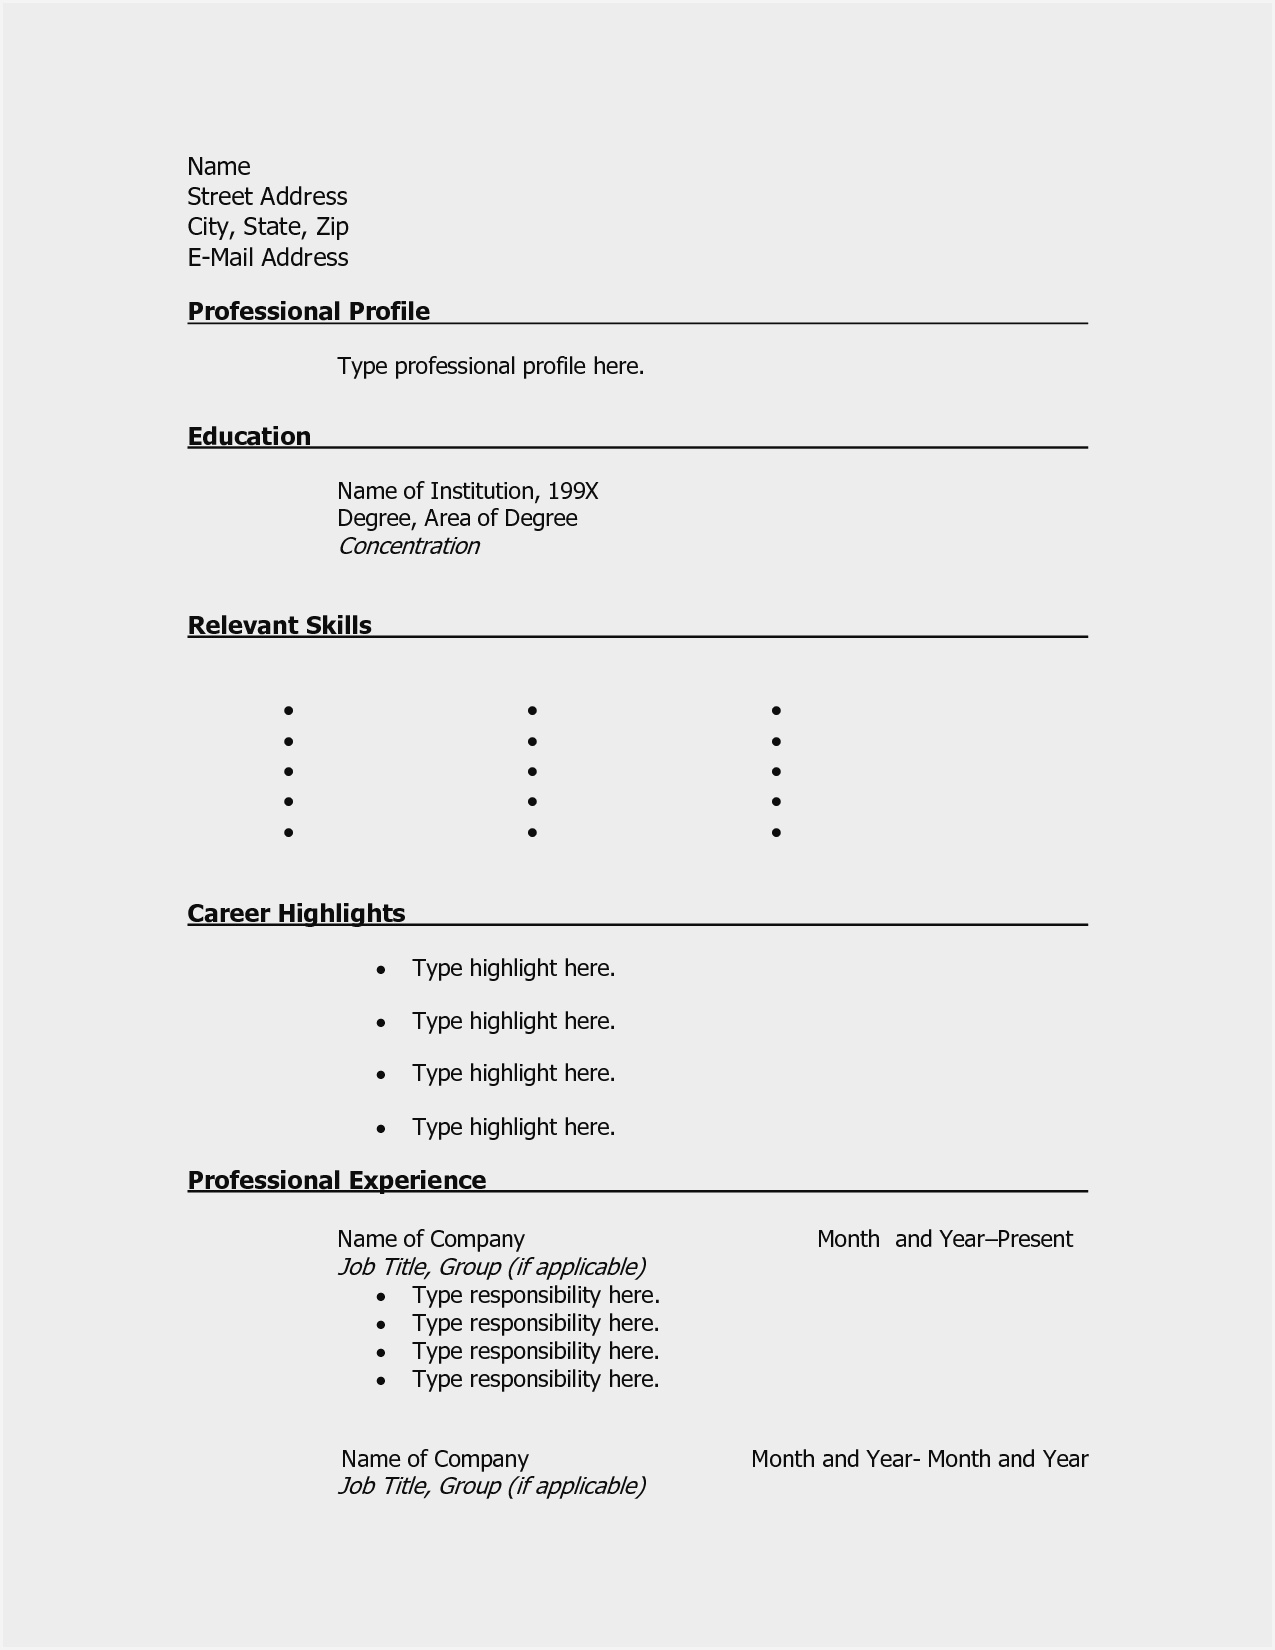 Free Download Blank Resume Form – Resume : Resume Sample #3669 For Free Blank Resume Templates For Microsoft Word